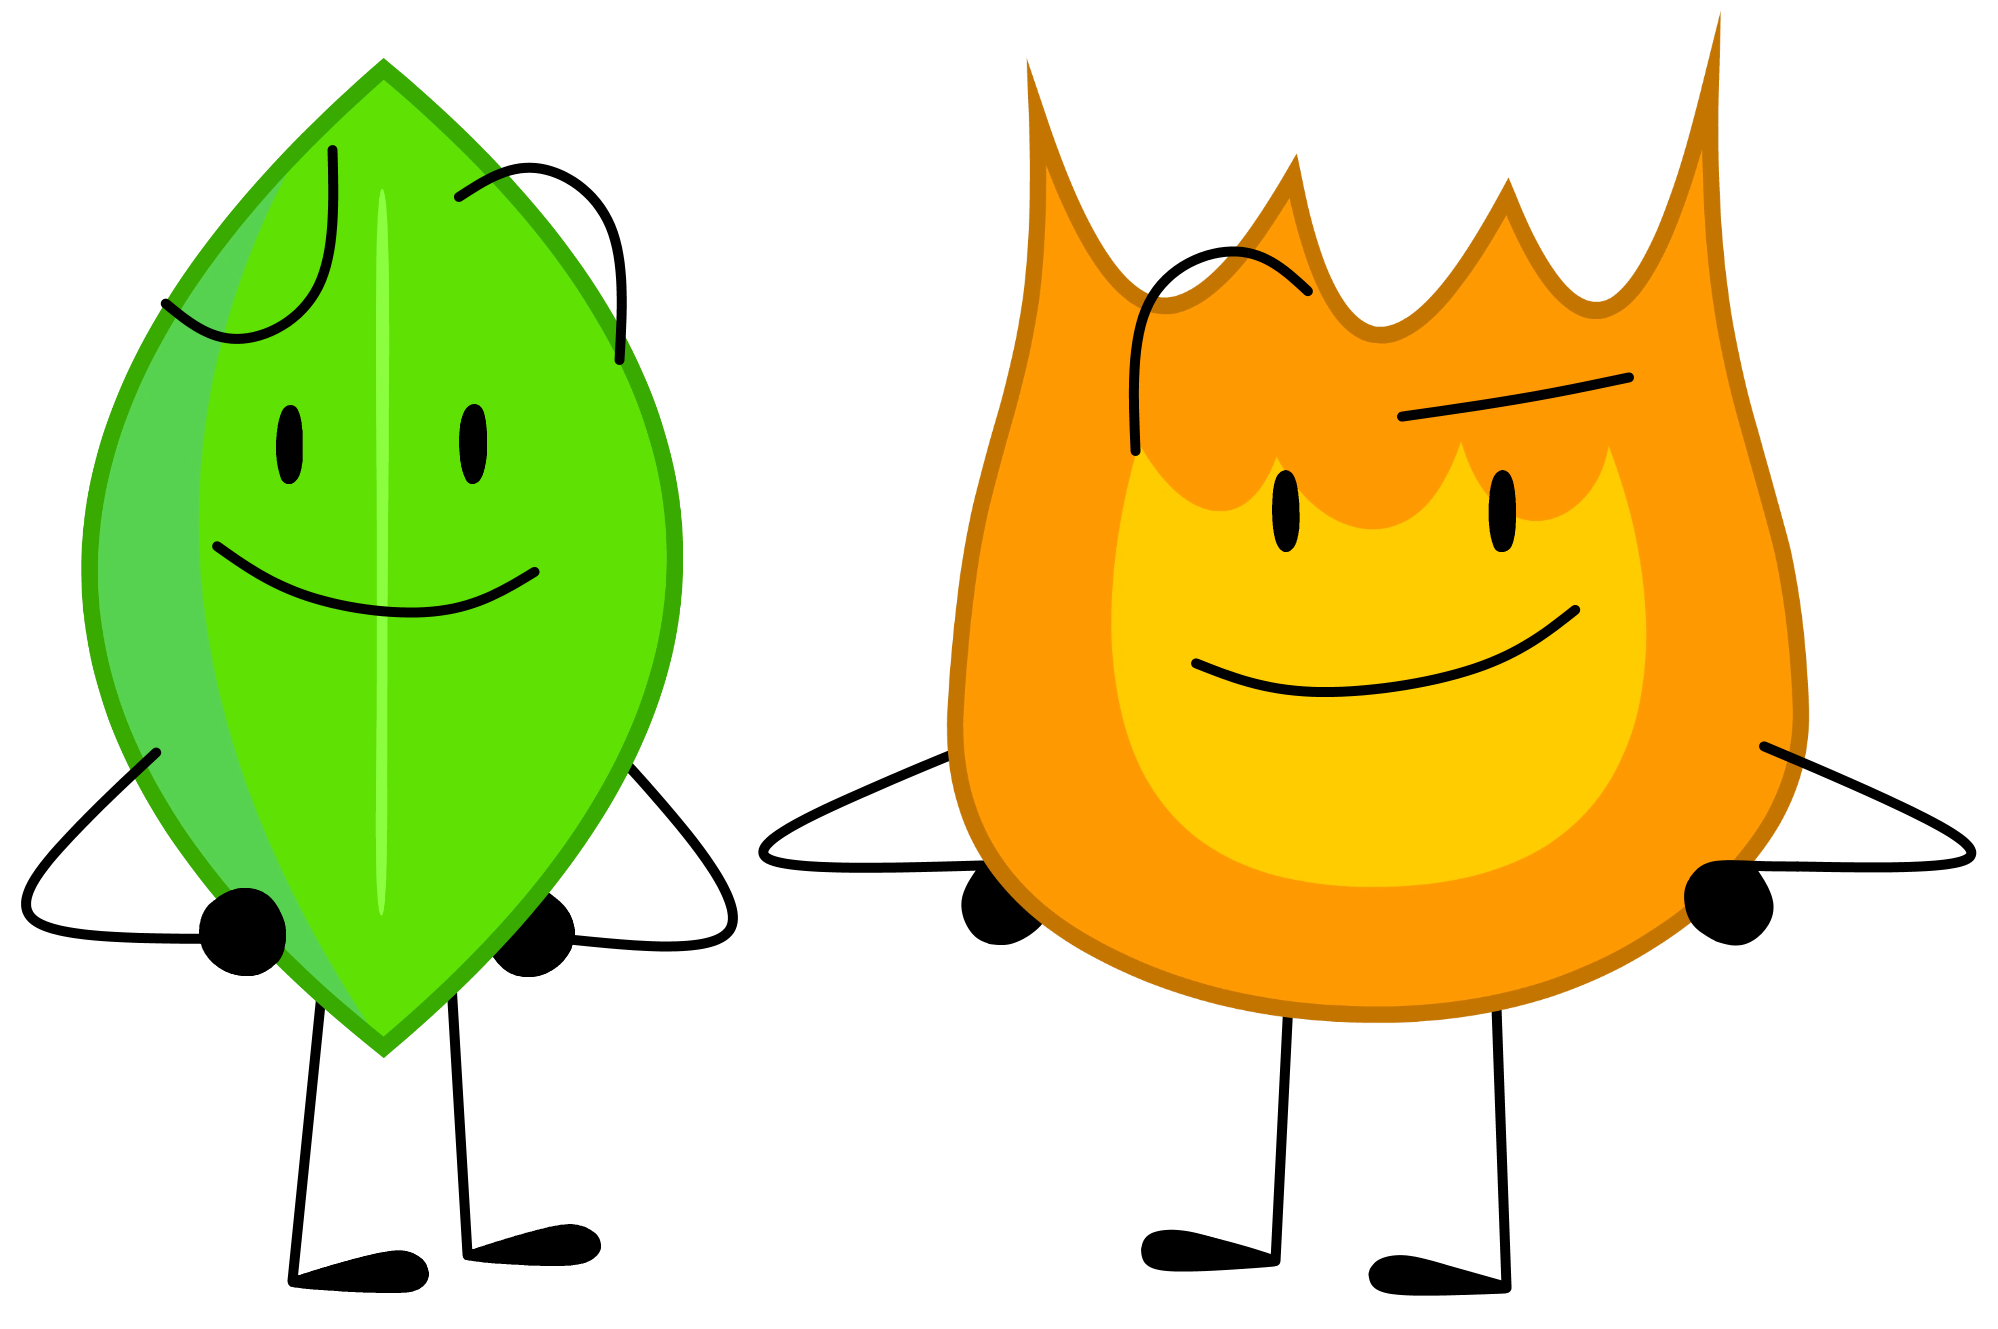 Leafy and Firey from Battle for Dream Island by skinnybeans17 on DeviantArt